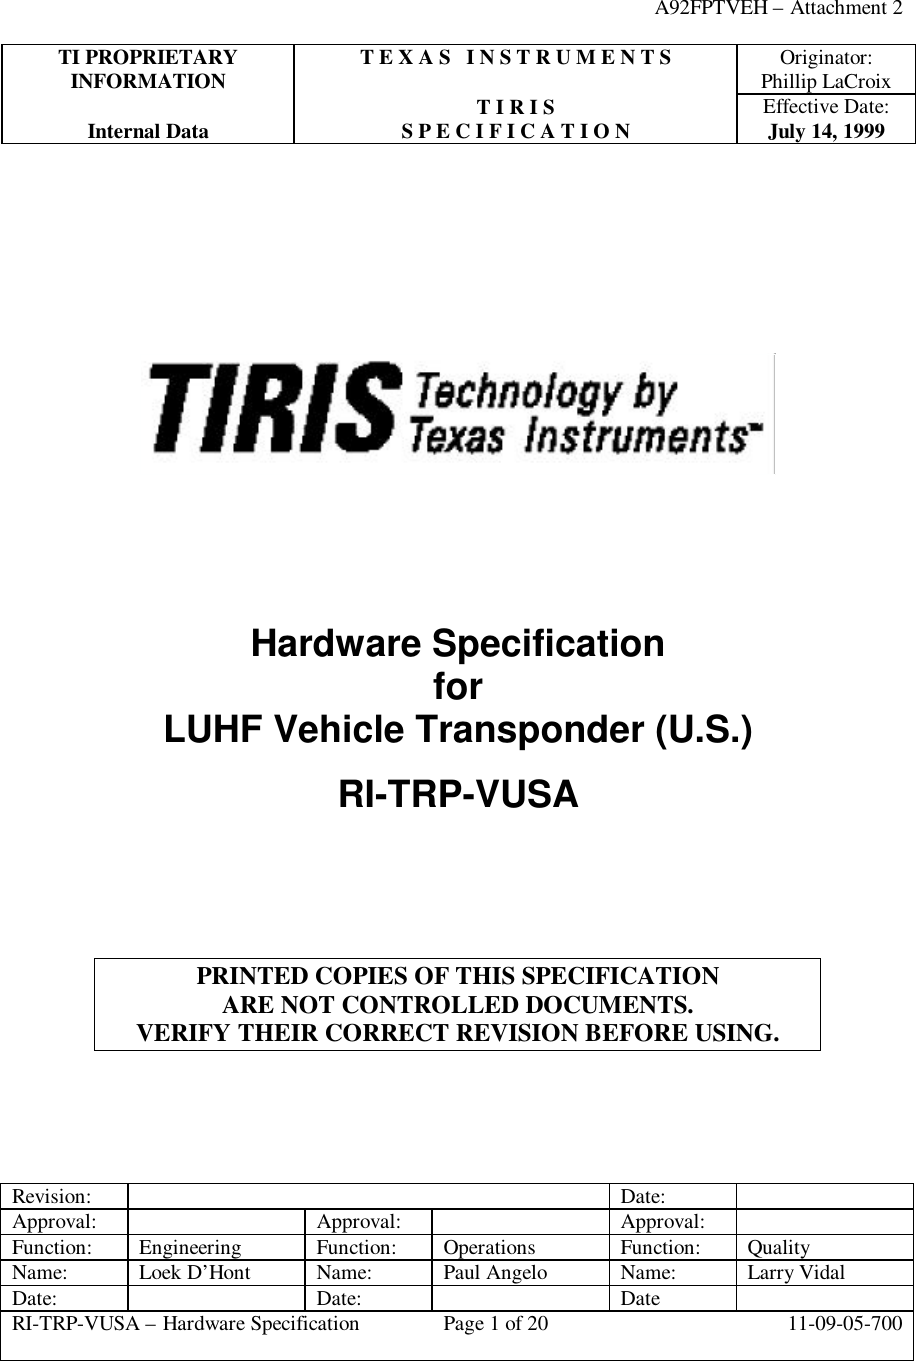 A92FPTVEH – Attachment 2TI PROPRIETARY T E X A S   I N S T R U M E N T S Originator:INFORMATION Phillip LaCroixT I R I S Effective Date:Internal Data S P E C I F I C A T I O N July 14, 1999Revision: Date:Approval: Approval: Approval:Function: Engineering Function: Operations Function: QualityName: Loek D’Hont Name: Paul Angelo Name: Larry VidalDate: Date: DateRI-TRP-VUSA – Hardware Specification Page 1 of 20 11-09-05-700Hardware SpecificationforLUHF Vehicle Transponder (U.S.)RI-TRP-VUSAPRINTED COPIES OF THIS SPECIFICATIONARE NOT CONTROLLED DOCUMENTS.VERIFY THEIR CORRECT REVISION BEFORE USING.